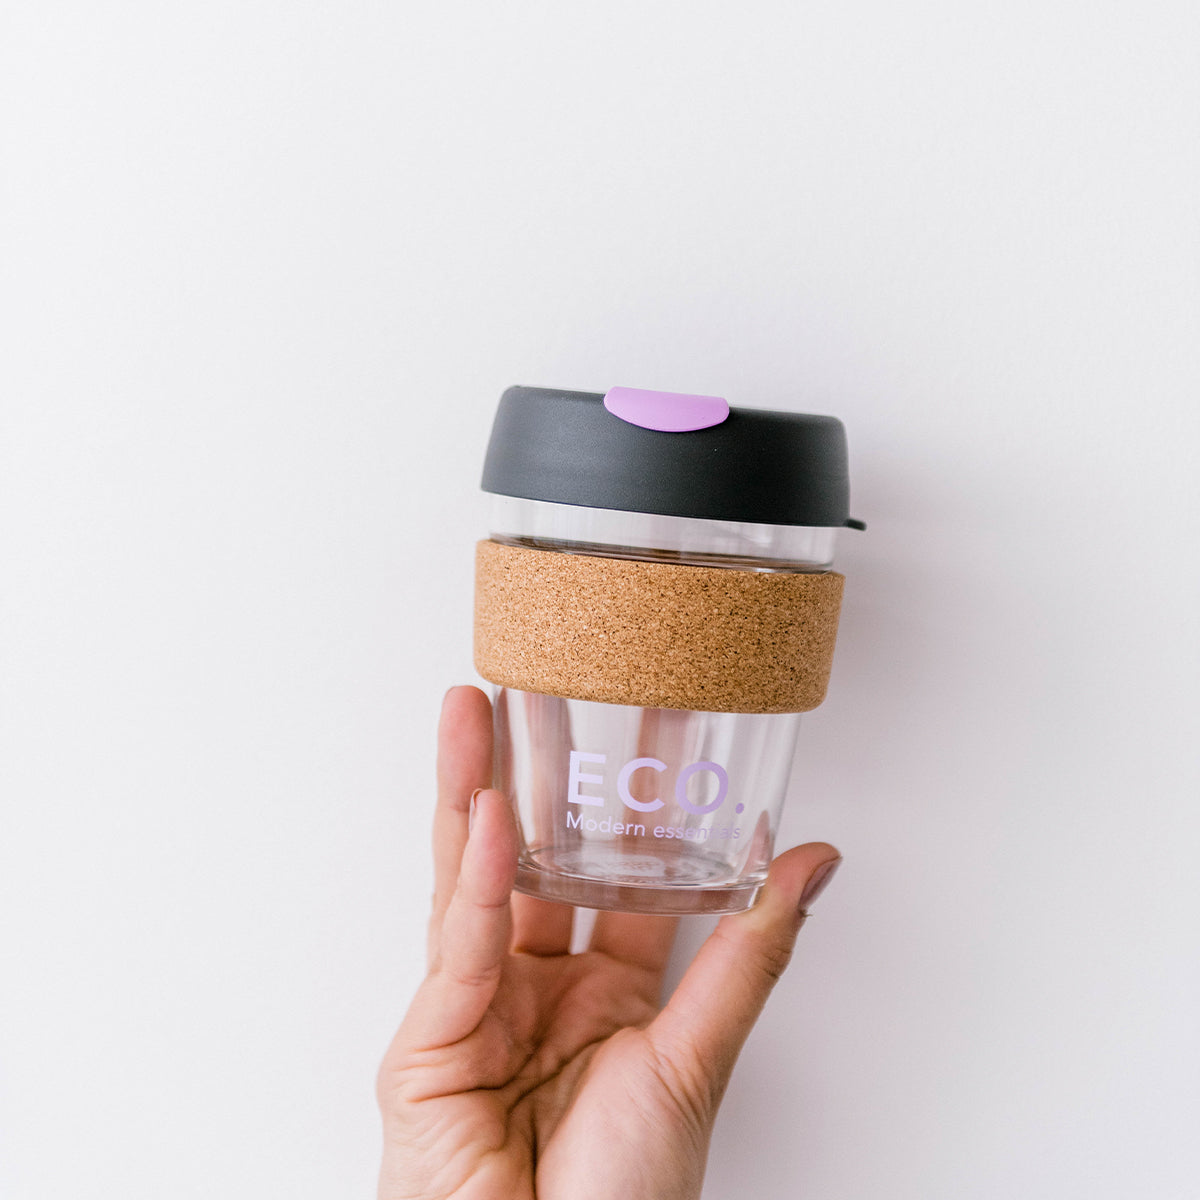 KeepCup Review - An In Depth Analysis of the Product